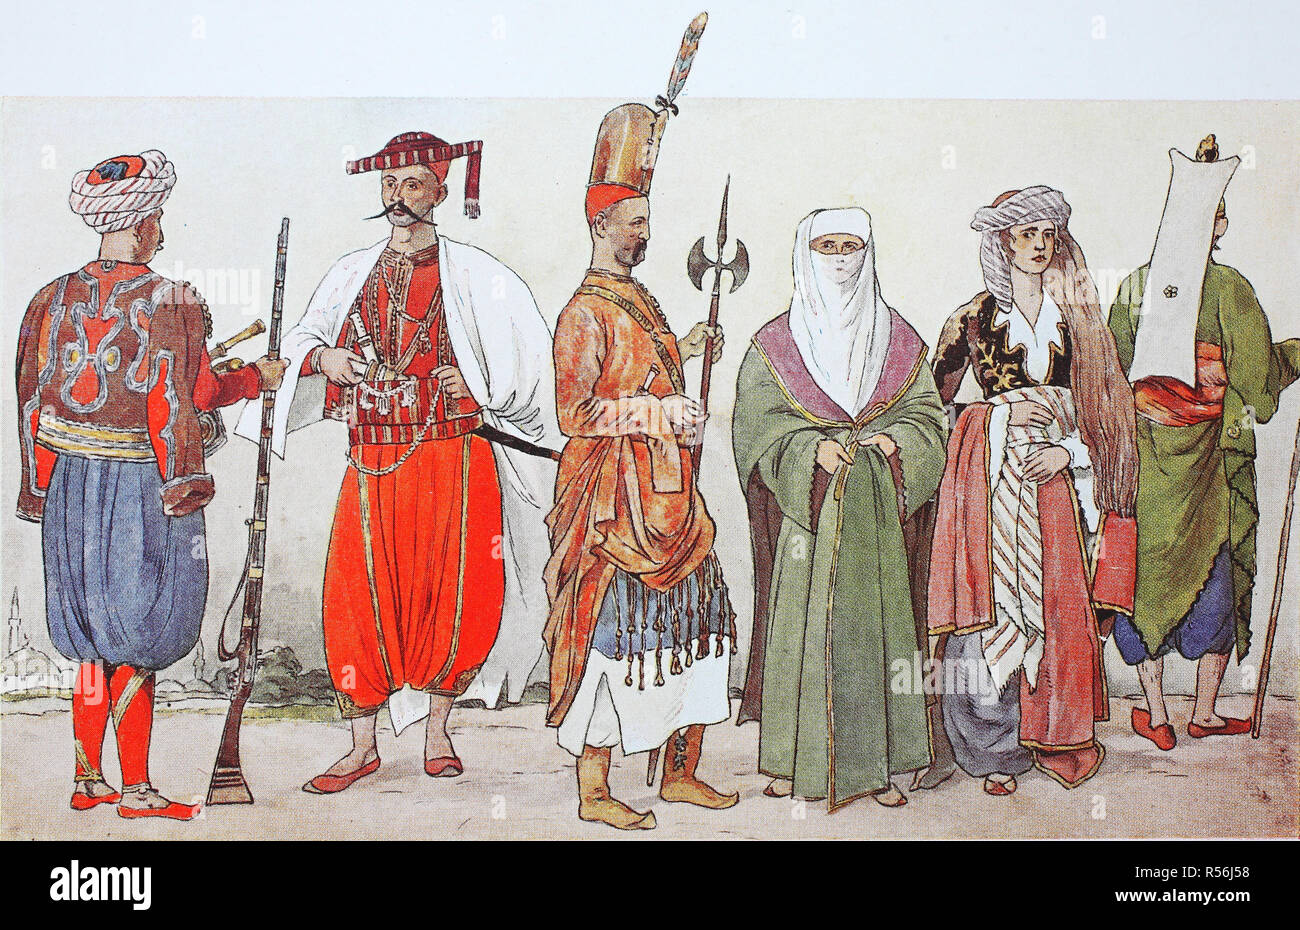 Fashion, historical clothes, folk costumes in Turkey from 1800, 1825, soldiers and women, illustration, Turkey Stock Photo